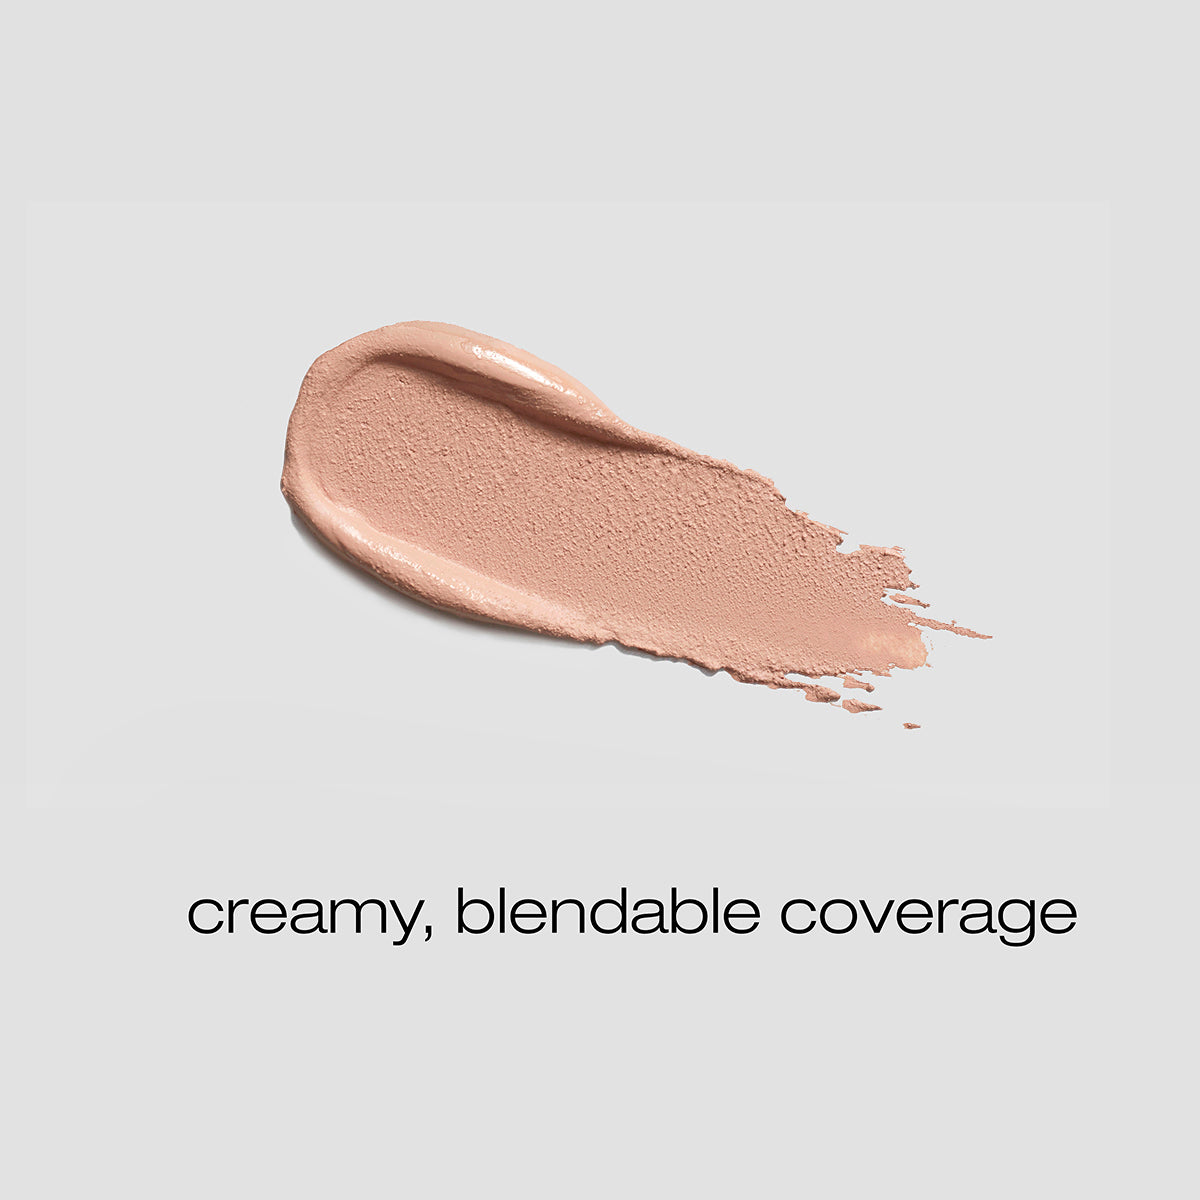 Spread of the Peaches and cream concealer with description of creamy, blendable coverage